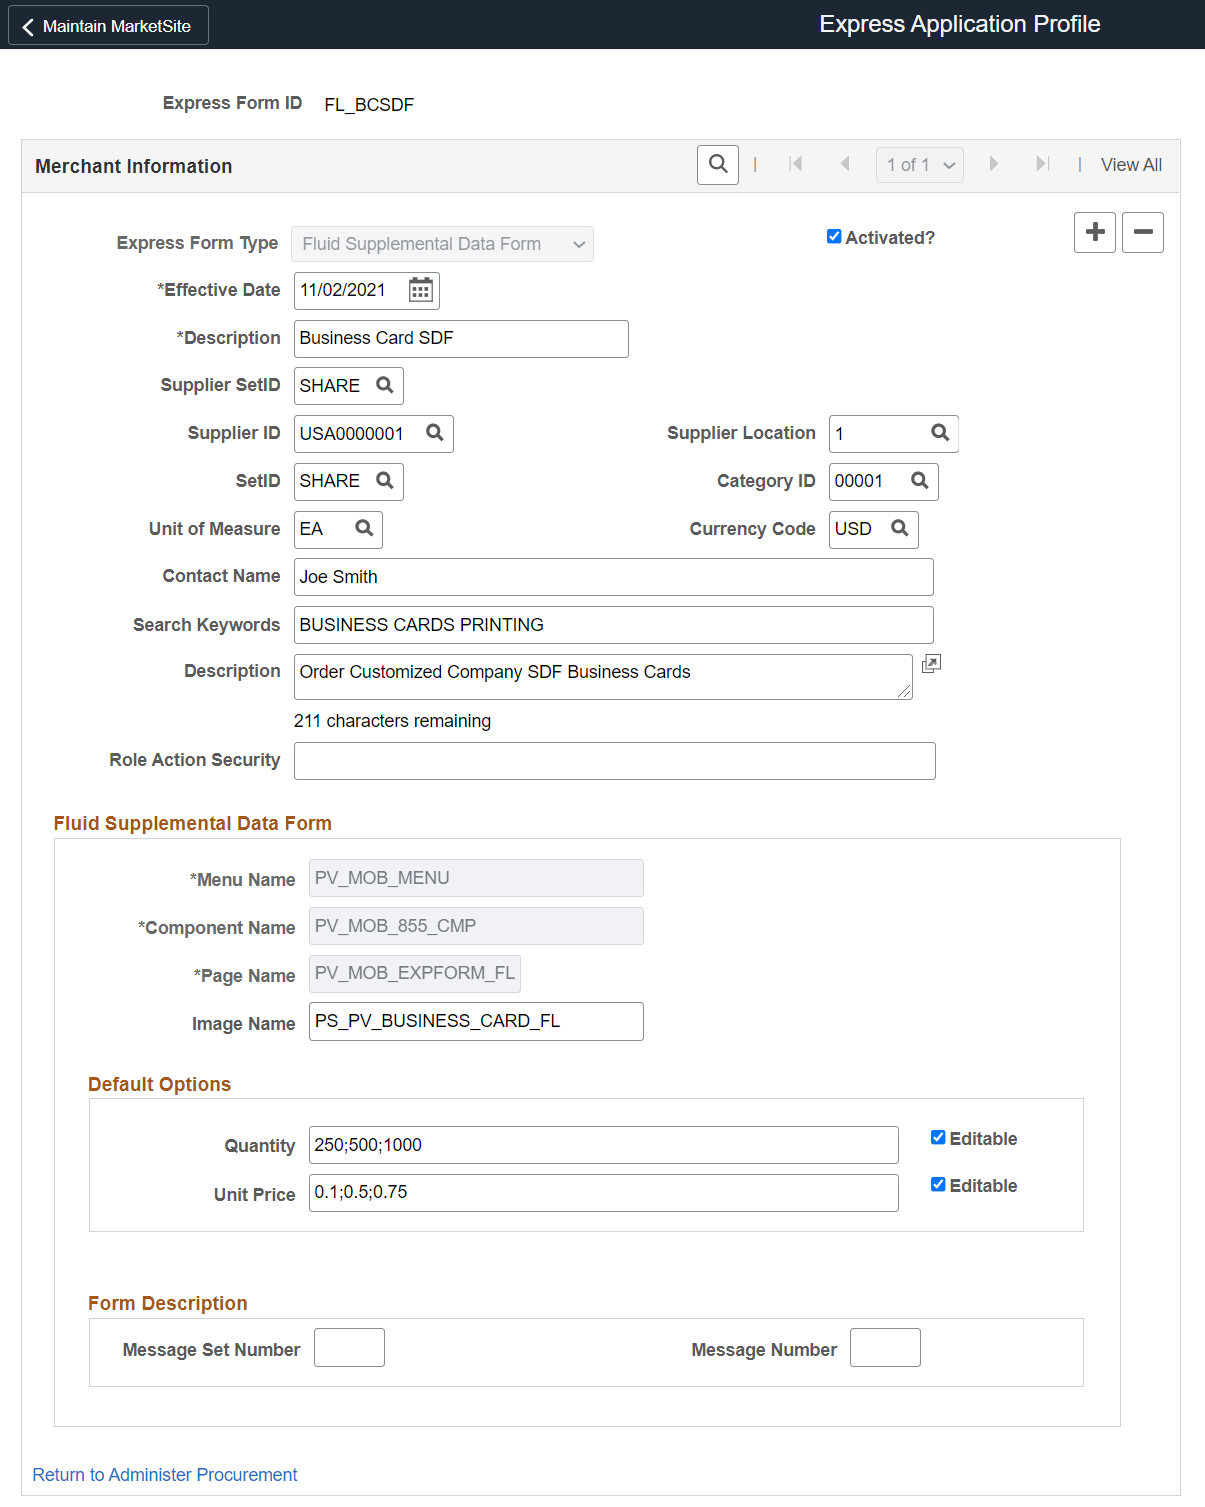 Express Form Profile Page